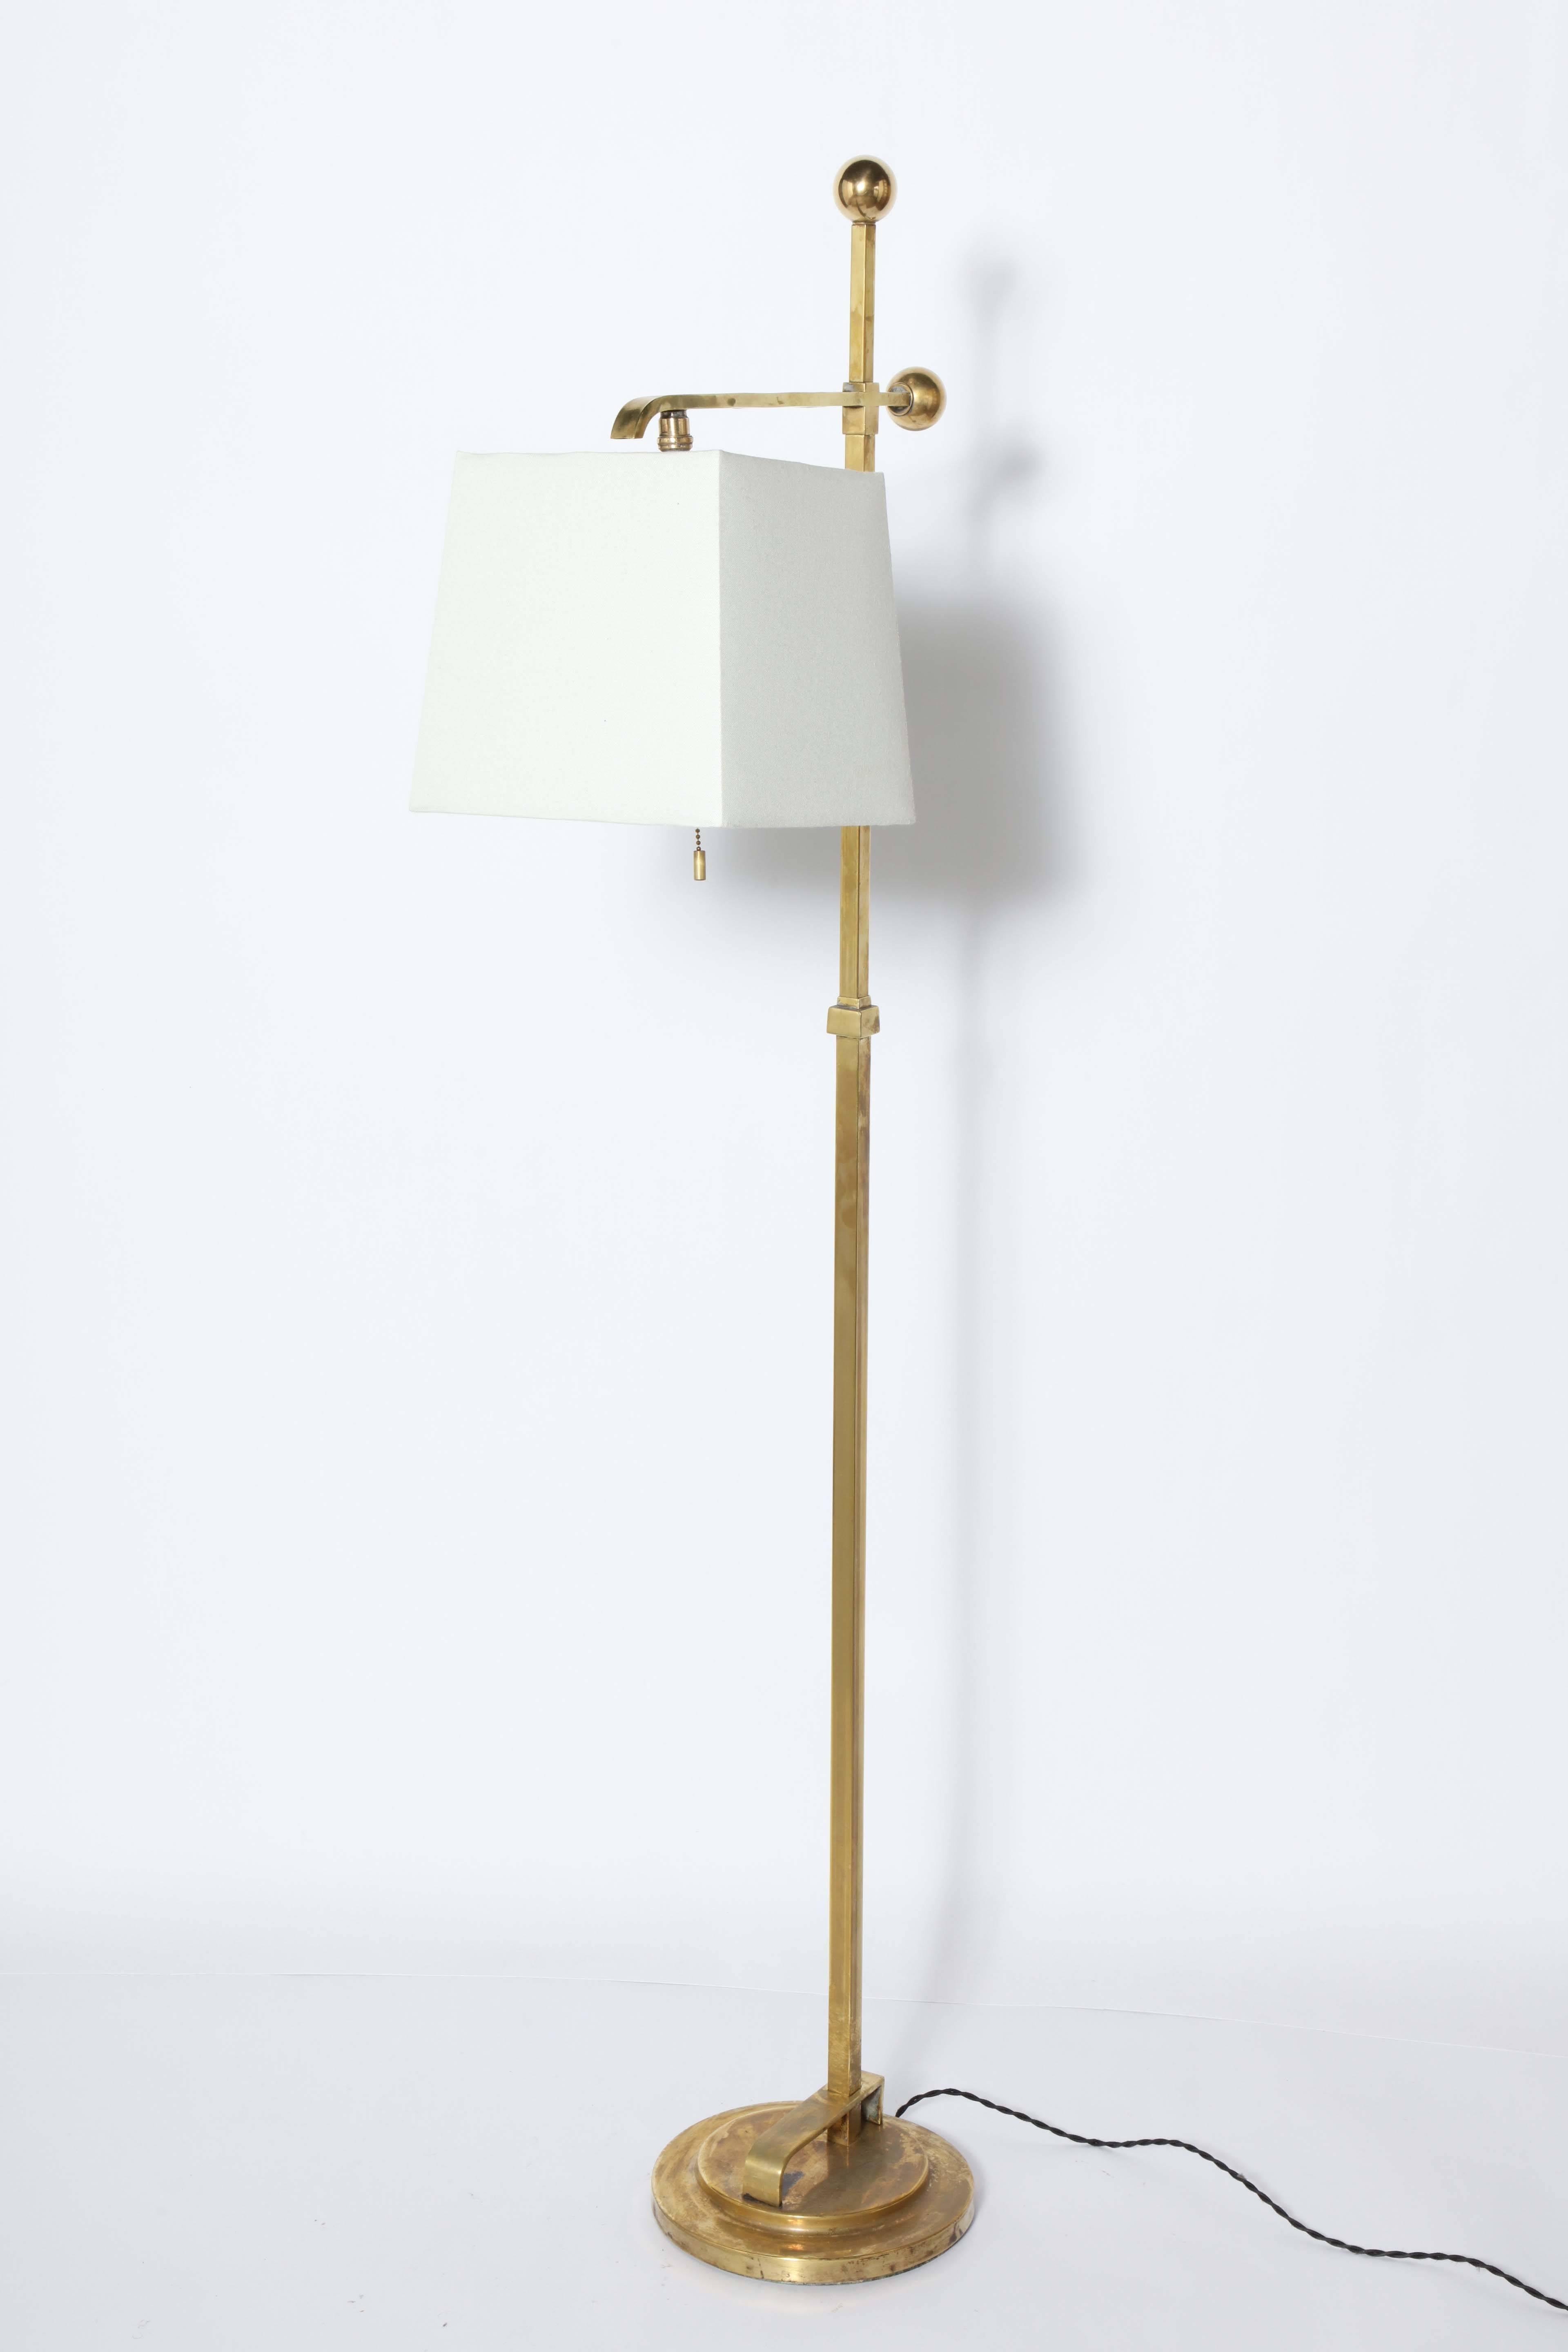 Art Deco Donald Deskey Brass Reading Floor Lamp by Deskey-Vollmer Inc.  With new Off-White Linen Shade (9H x 8W x 9.5W) on round base. Ball Socket. Vintage distressed finish. Rarity. Made in New York. 